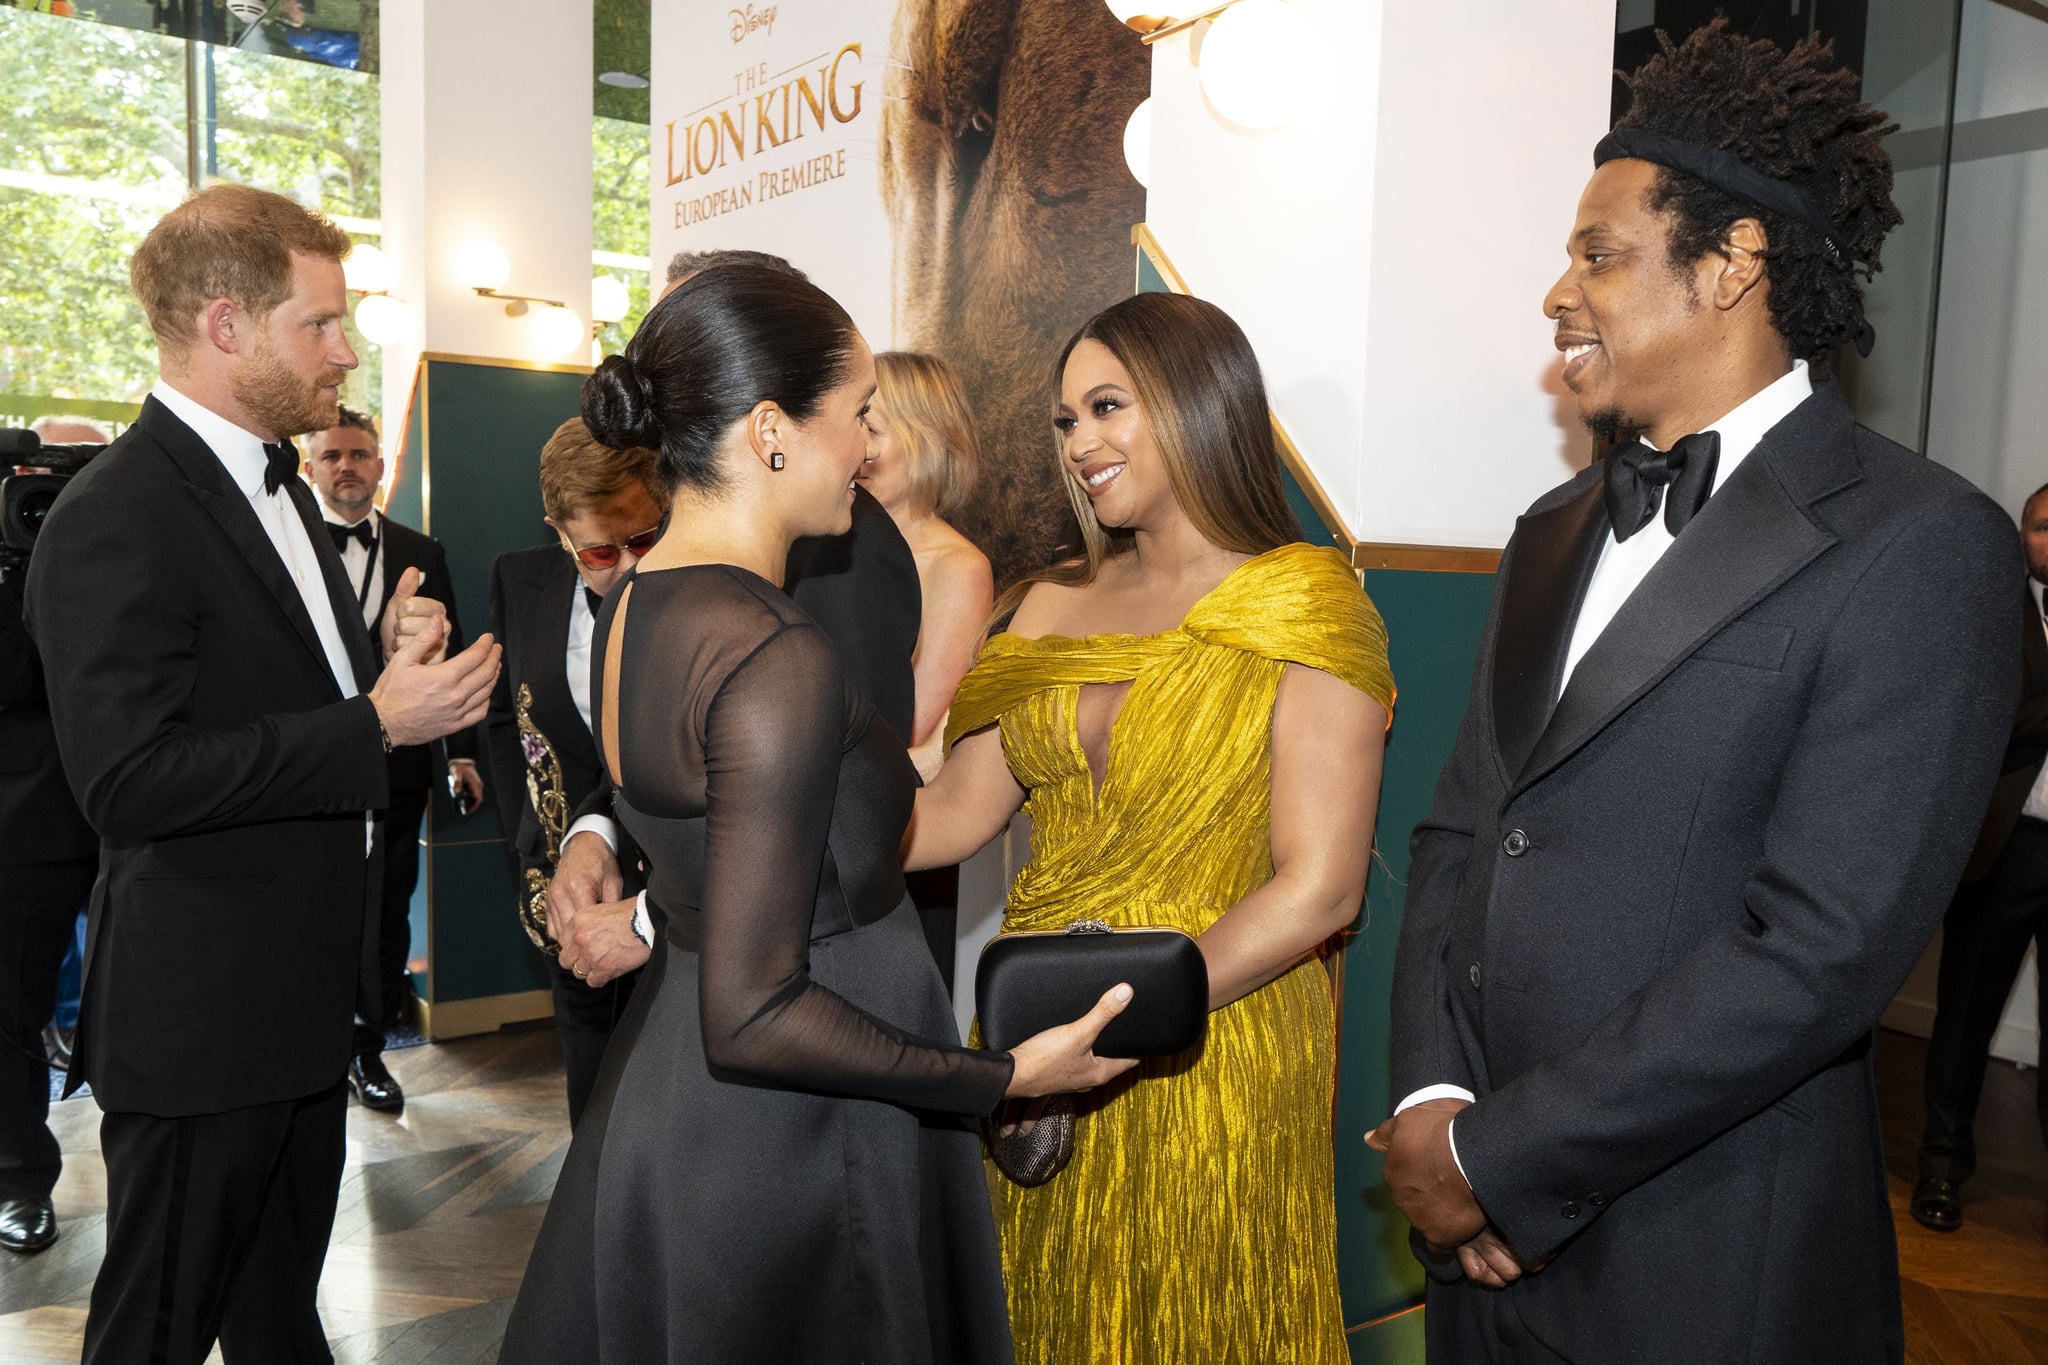 TOPSHOT - Britain's Prince Harry, Duke of Sussex (L) and Britain's Meghan, Duchess of Sussex (2nd L) meets cast and crew, including US singer-songwriter Beyoncé (C) and her husband, US rapper Jay-Z (R) as they attend the European premiere of the film The Lion King in London on July 14, 2019. (Photo by Niklas HALLE'N / POOL / AFP) (Photo by NIKLAS HALLE'N/POOL/AFP via Getty Images)